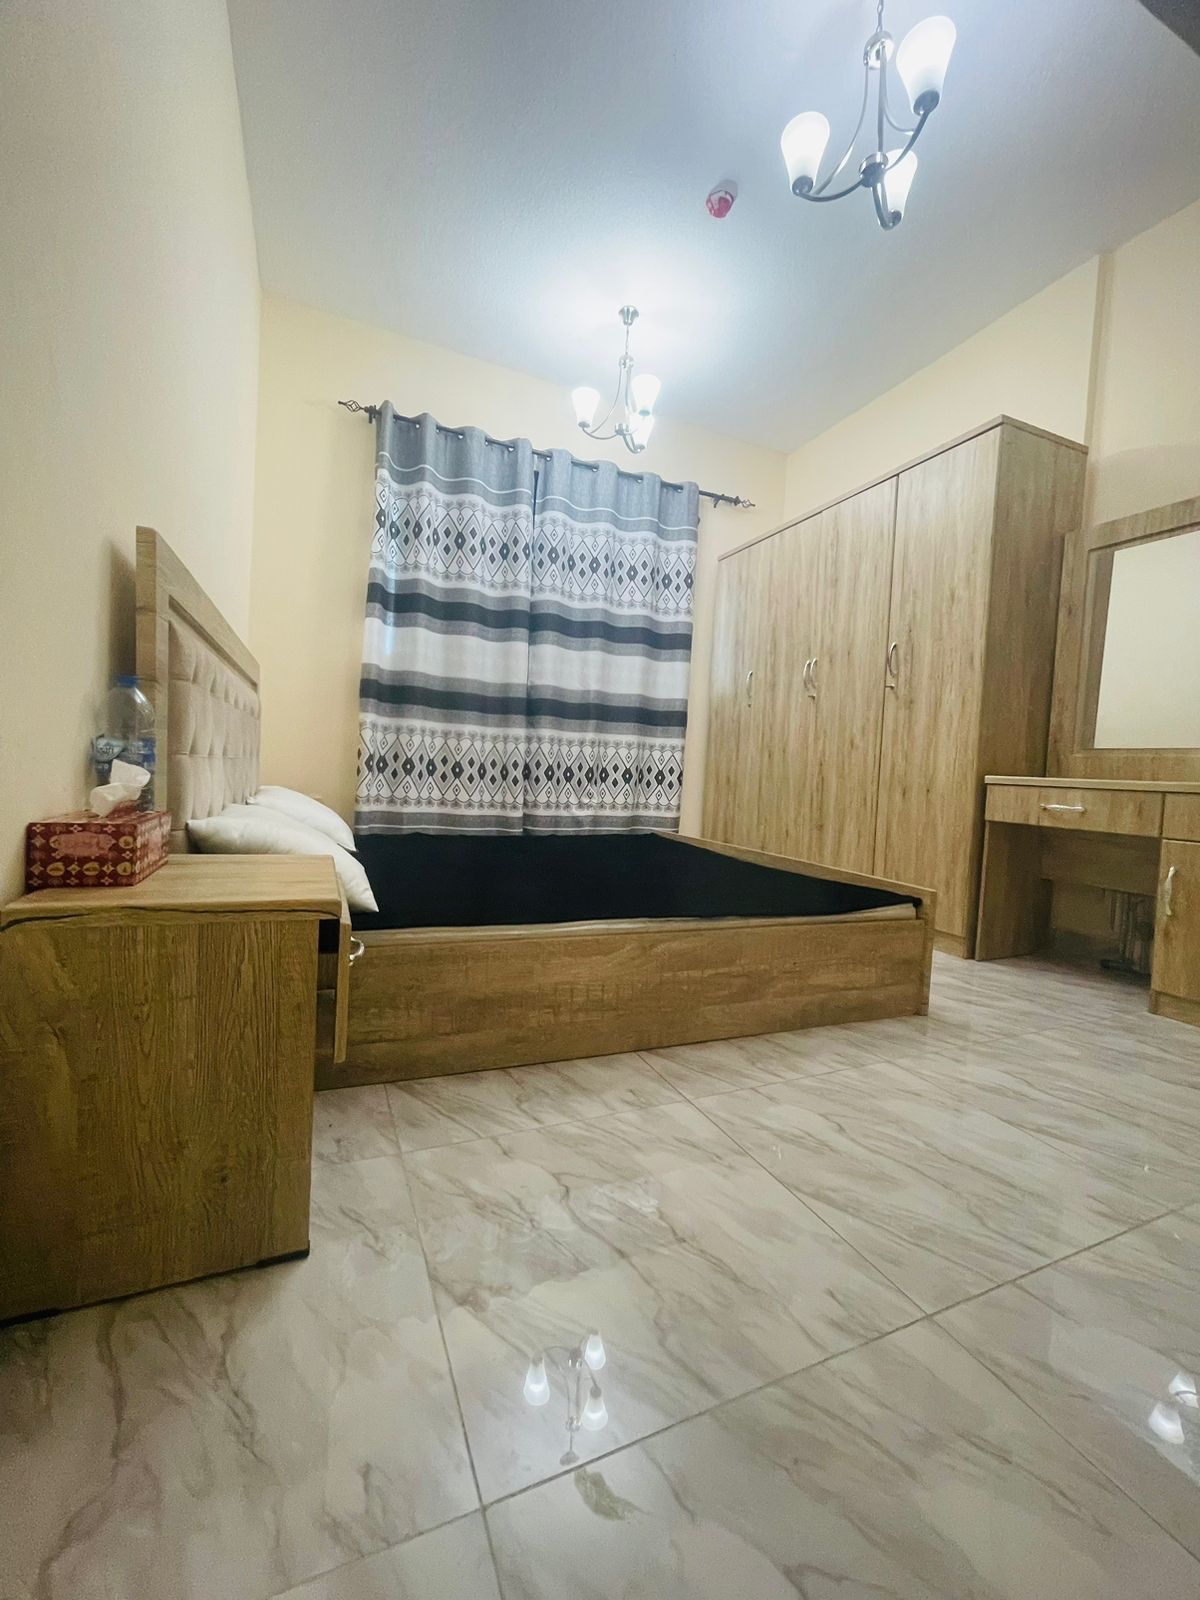 Monthly 1 for rent in Al Taawun,   UAE 